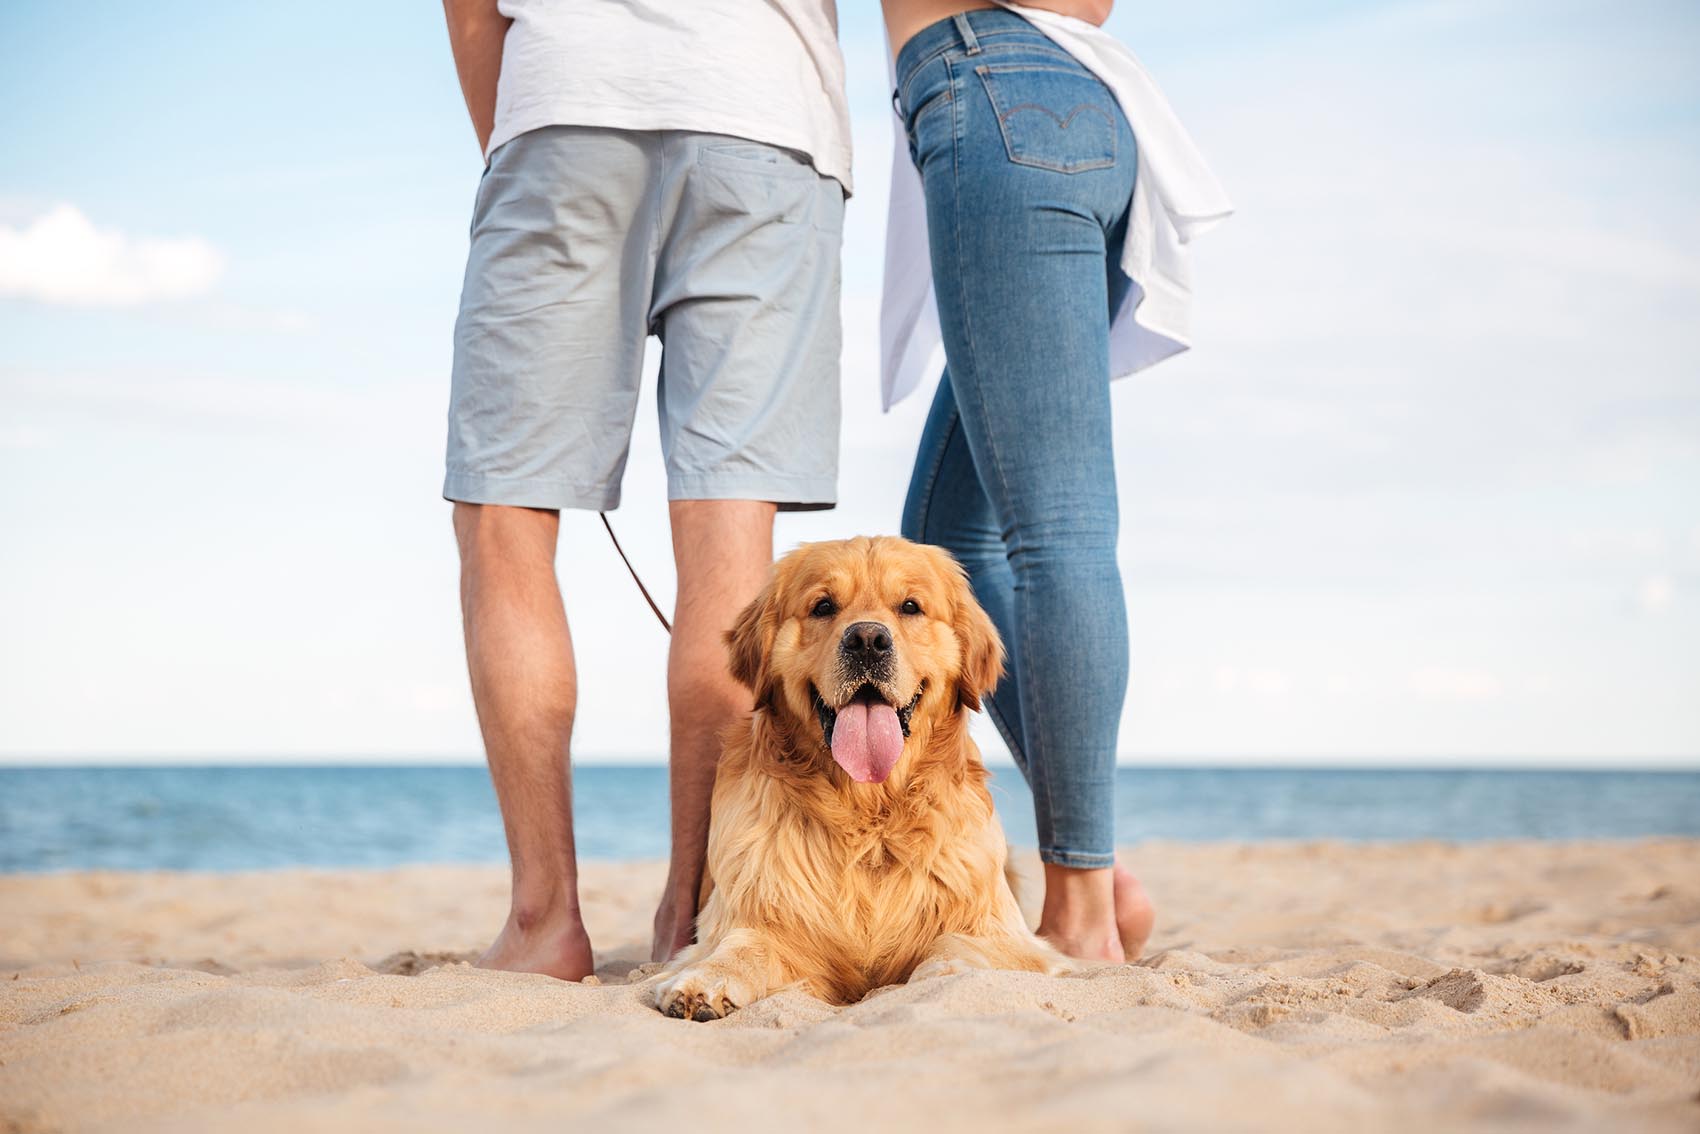 ALL DOGS GO TO CHARLESTON SC: A DOG FRIENDLY VACATION DESTINATION